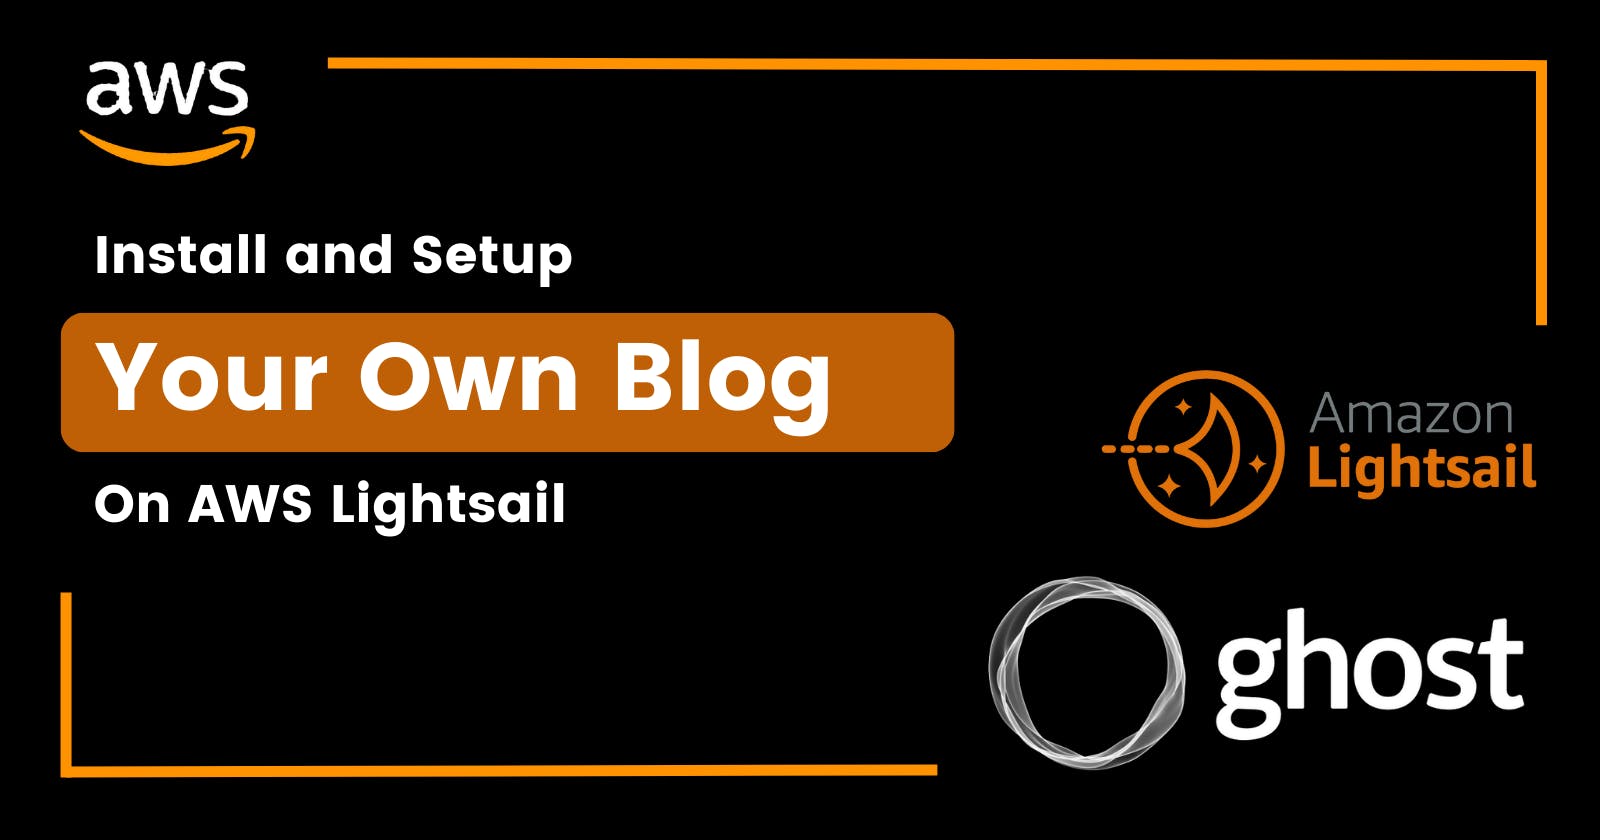 How to Install and Set Up a Ghost Blog on AWS Lightsail - Step by Step Tutorial